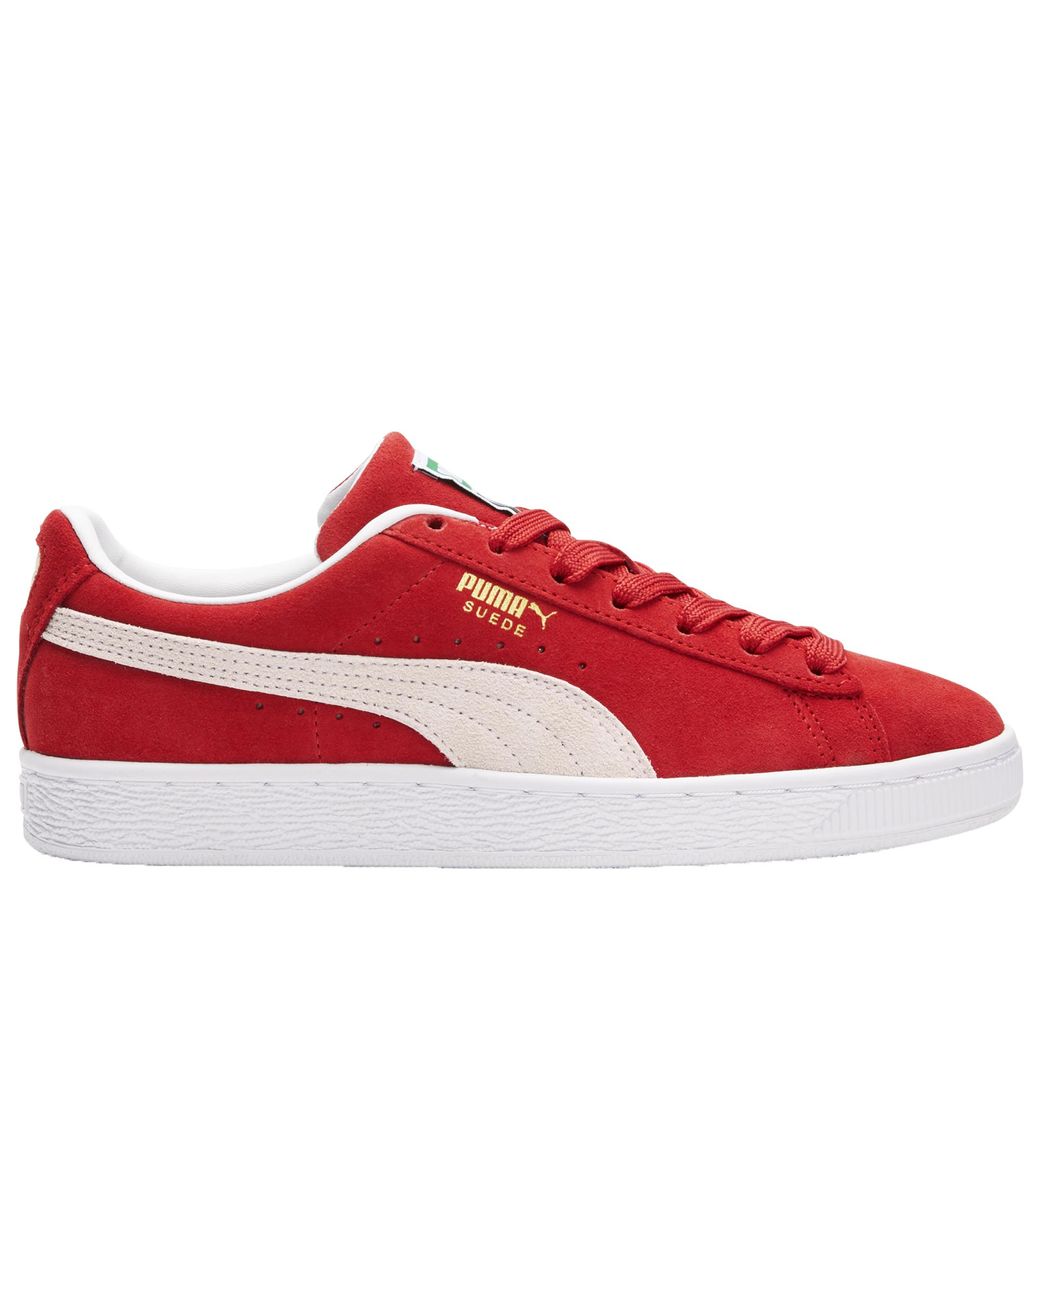 PUMA Suede Classic - Shoes in Red - Lyst